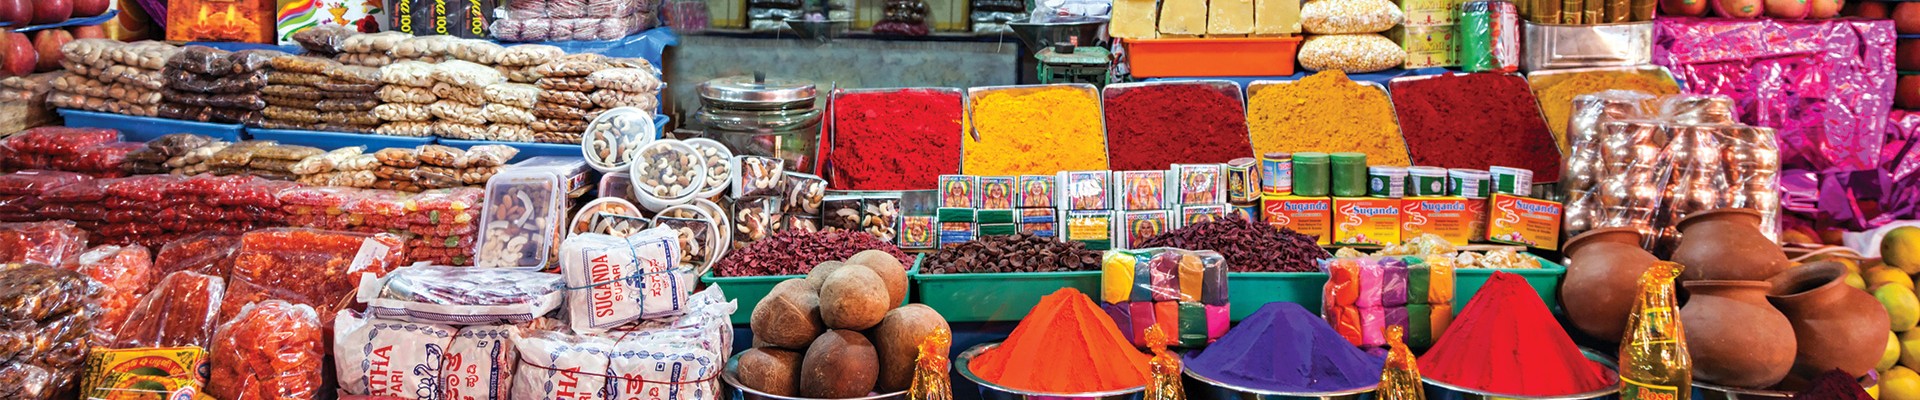 3* Delhi Shopping Tour  - India Package (5 nights)